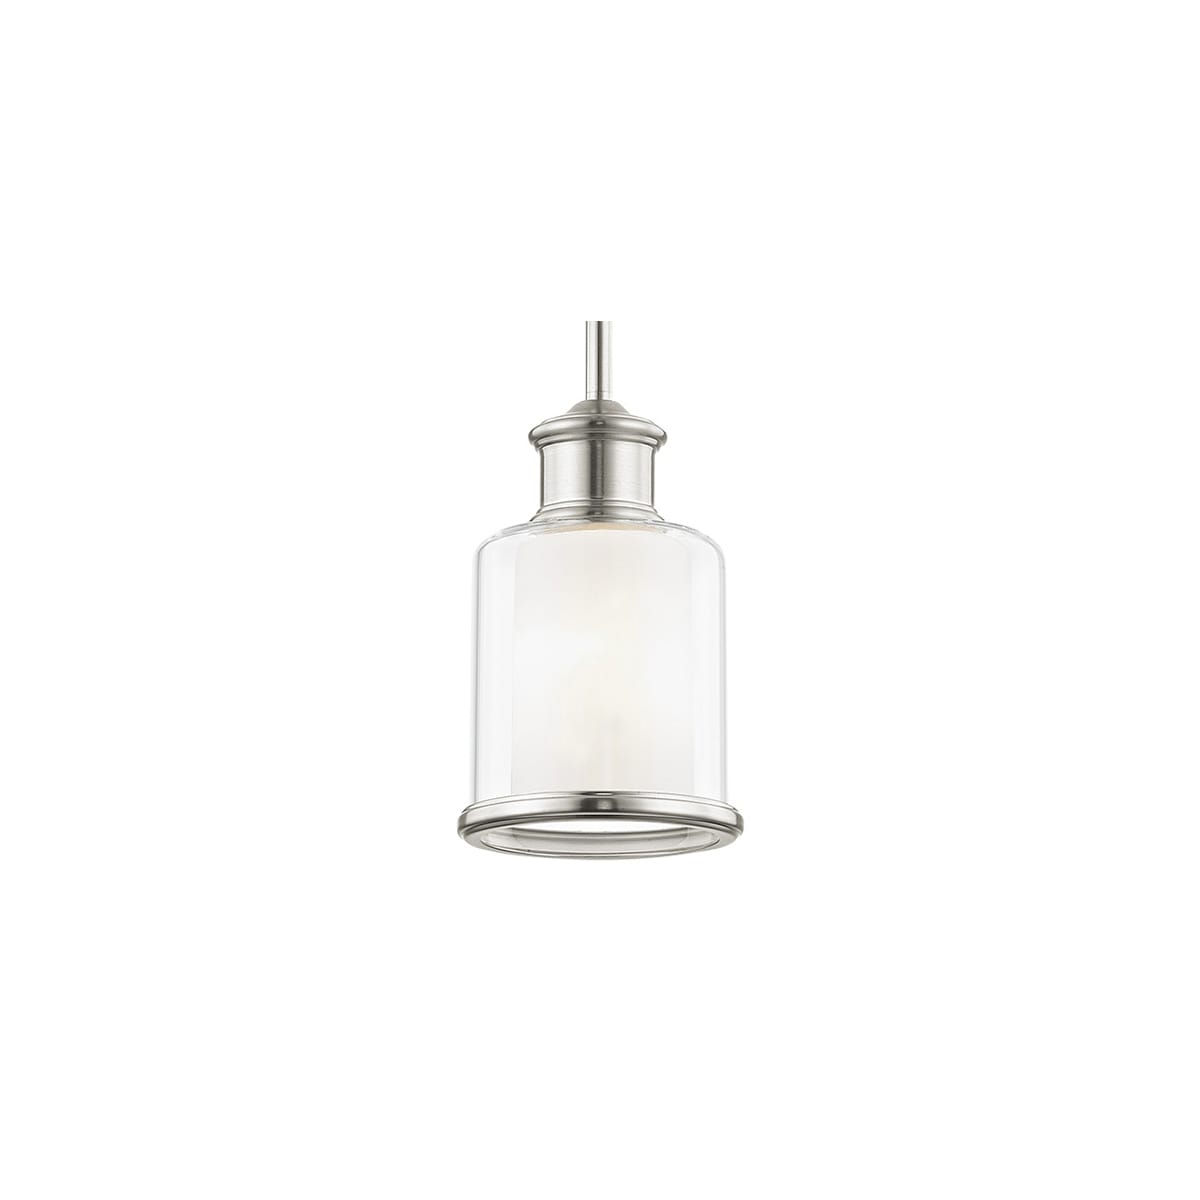 Finish Livex Lighting 40206-91 Transitional Six Light Chandelier from Middlebush Collection in Pwt Brushed Nickel Slvr Nckl B/S